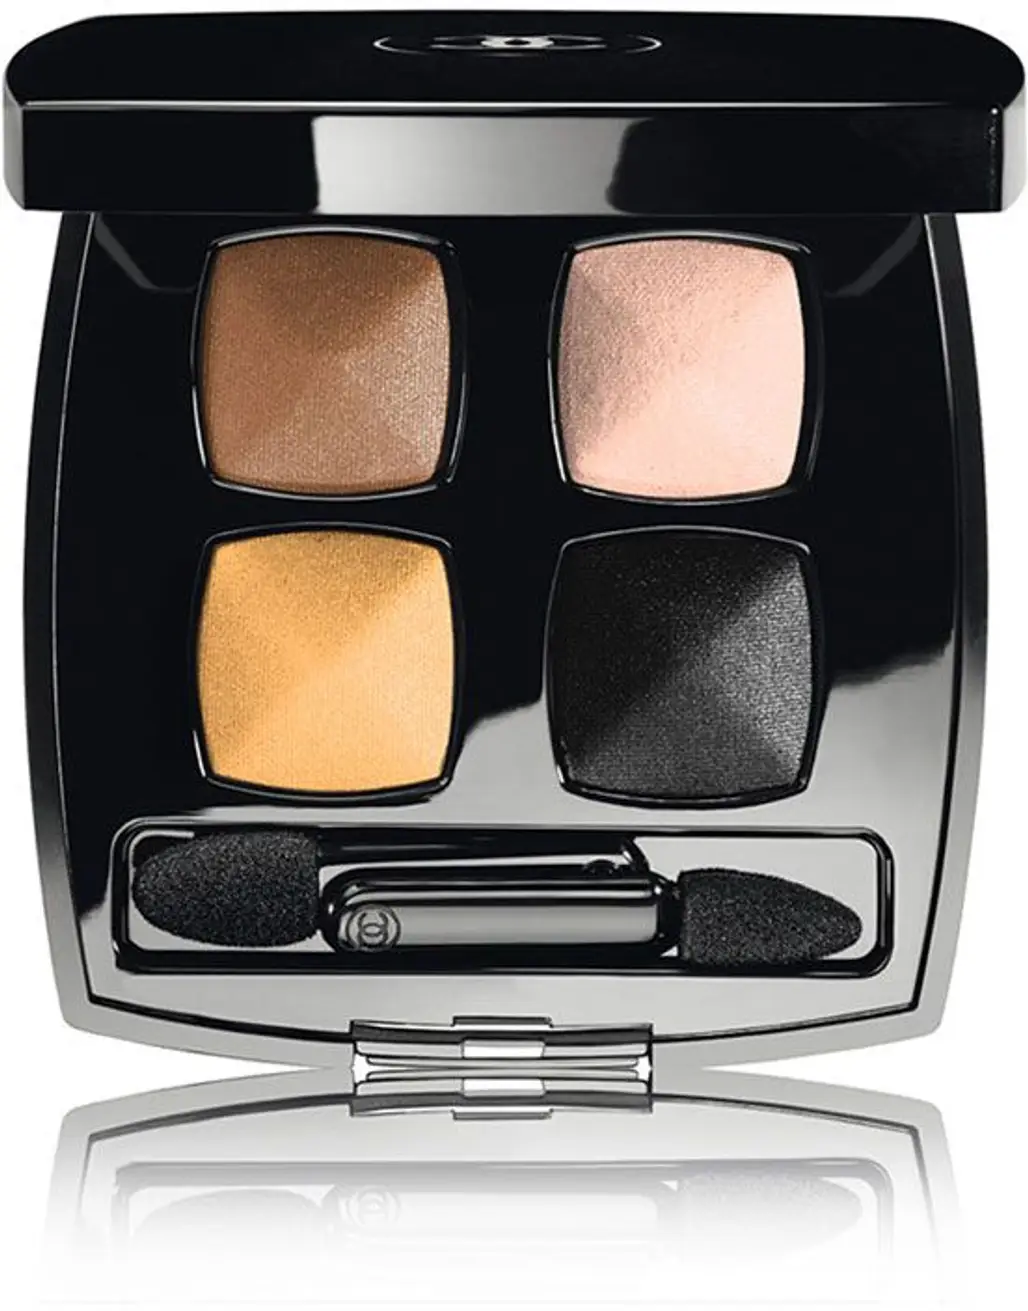 Chanel Les 4 Ombres Eye Makeup